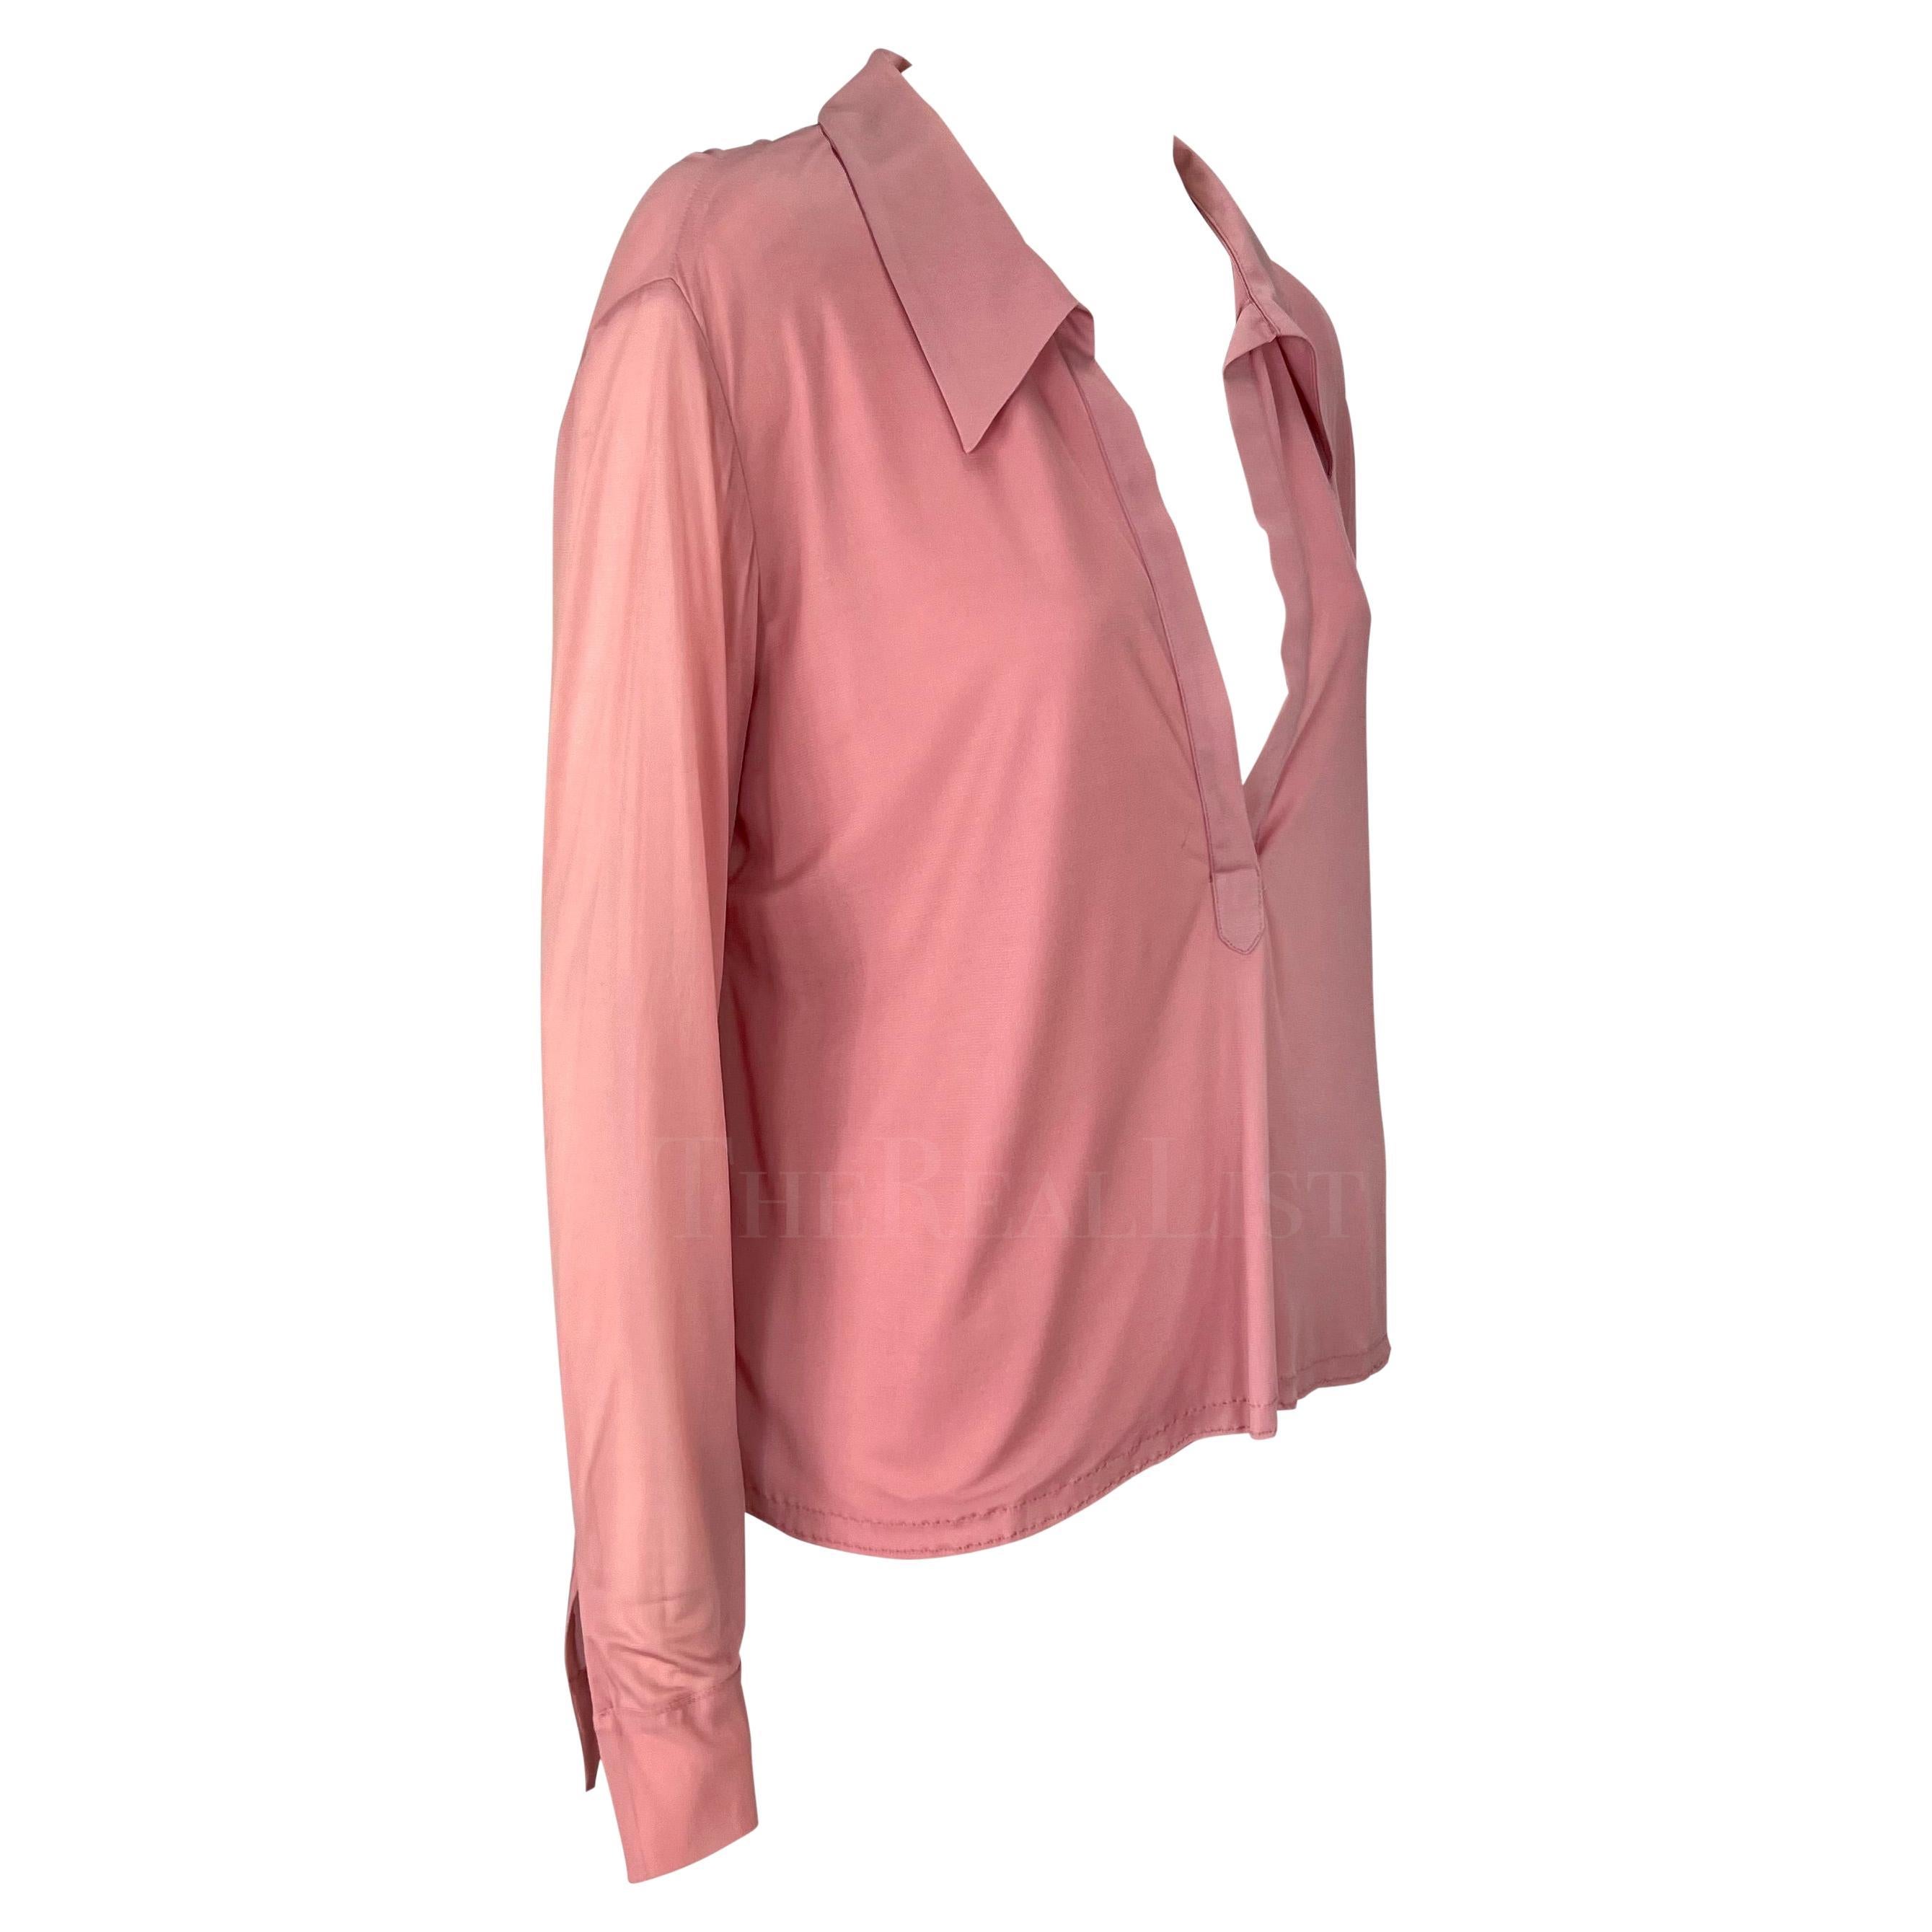 NWT S/S 2000 Gucci by Tom Ford Runway Ad Plunging Pink Collared Blouse Top For Sale 7